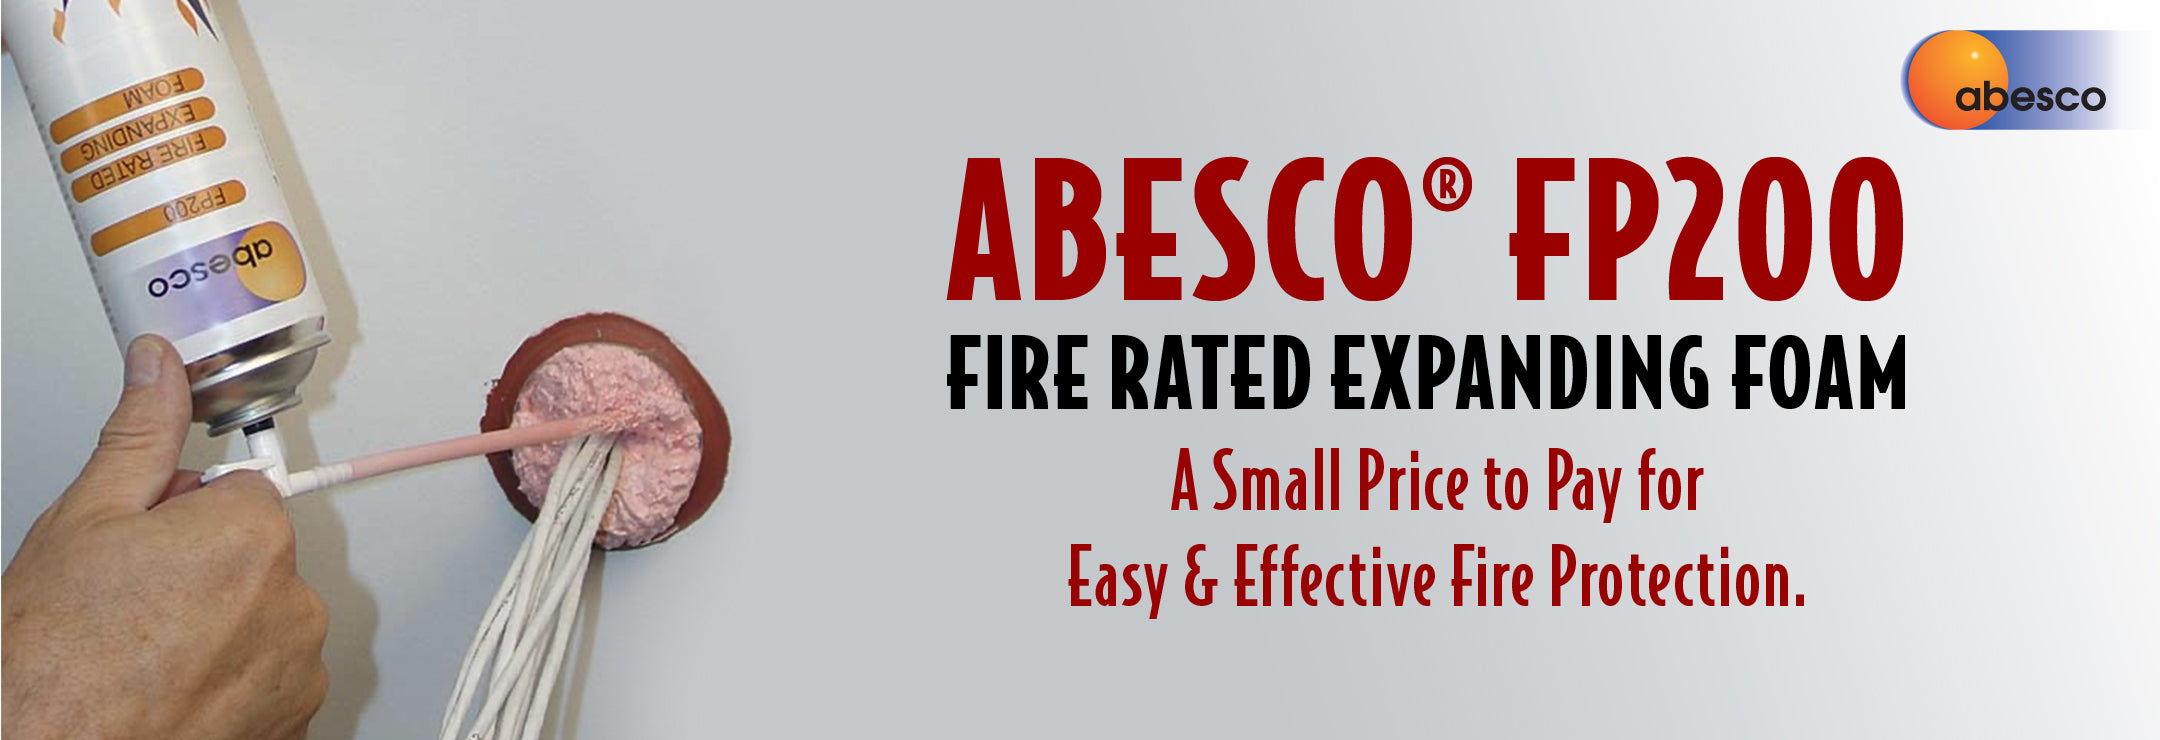 Abesco Fire Rated Expanding Foam